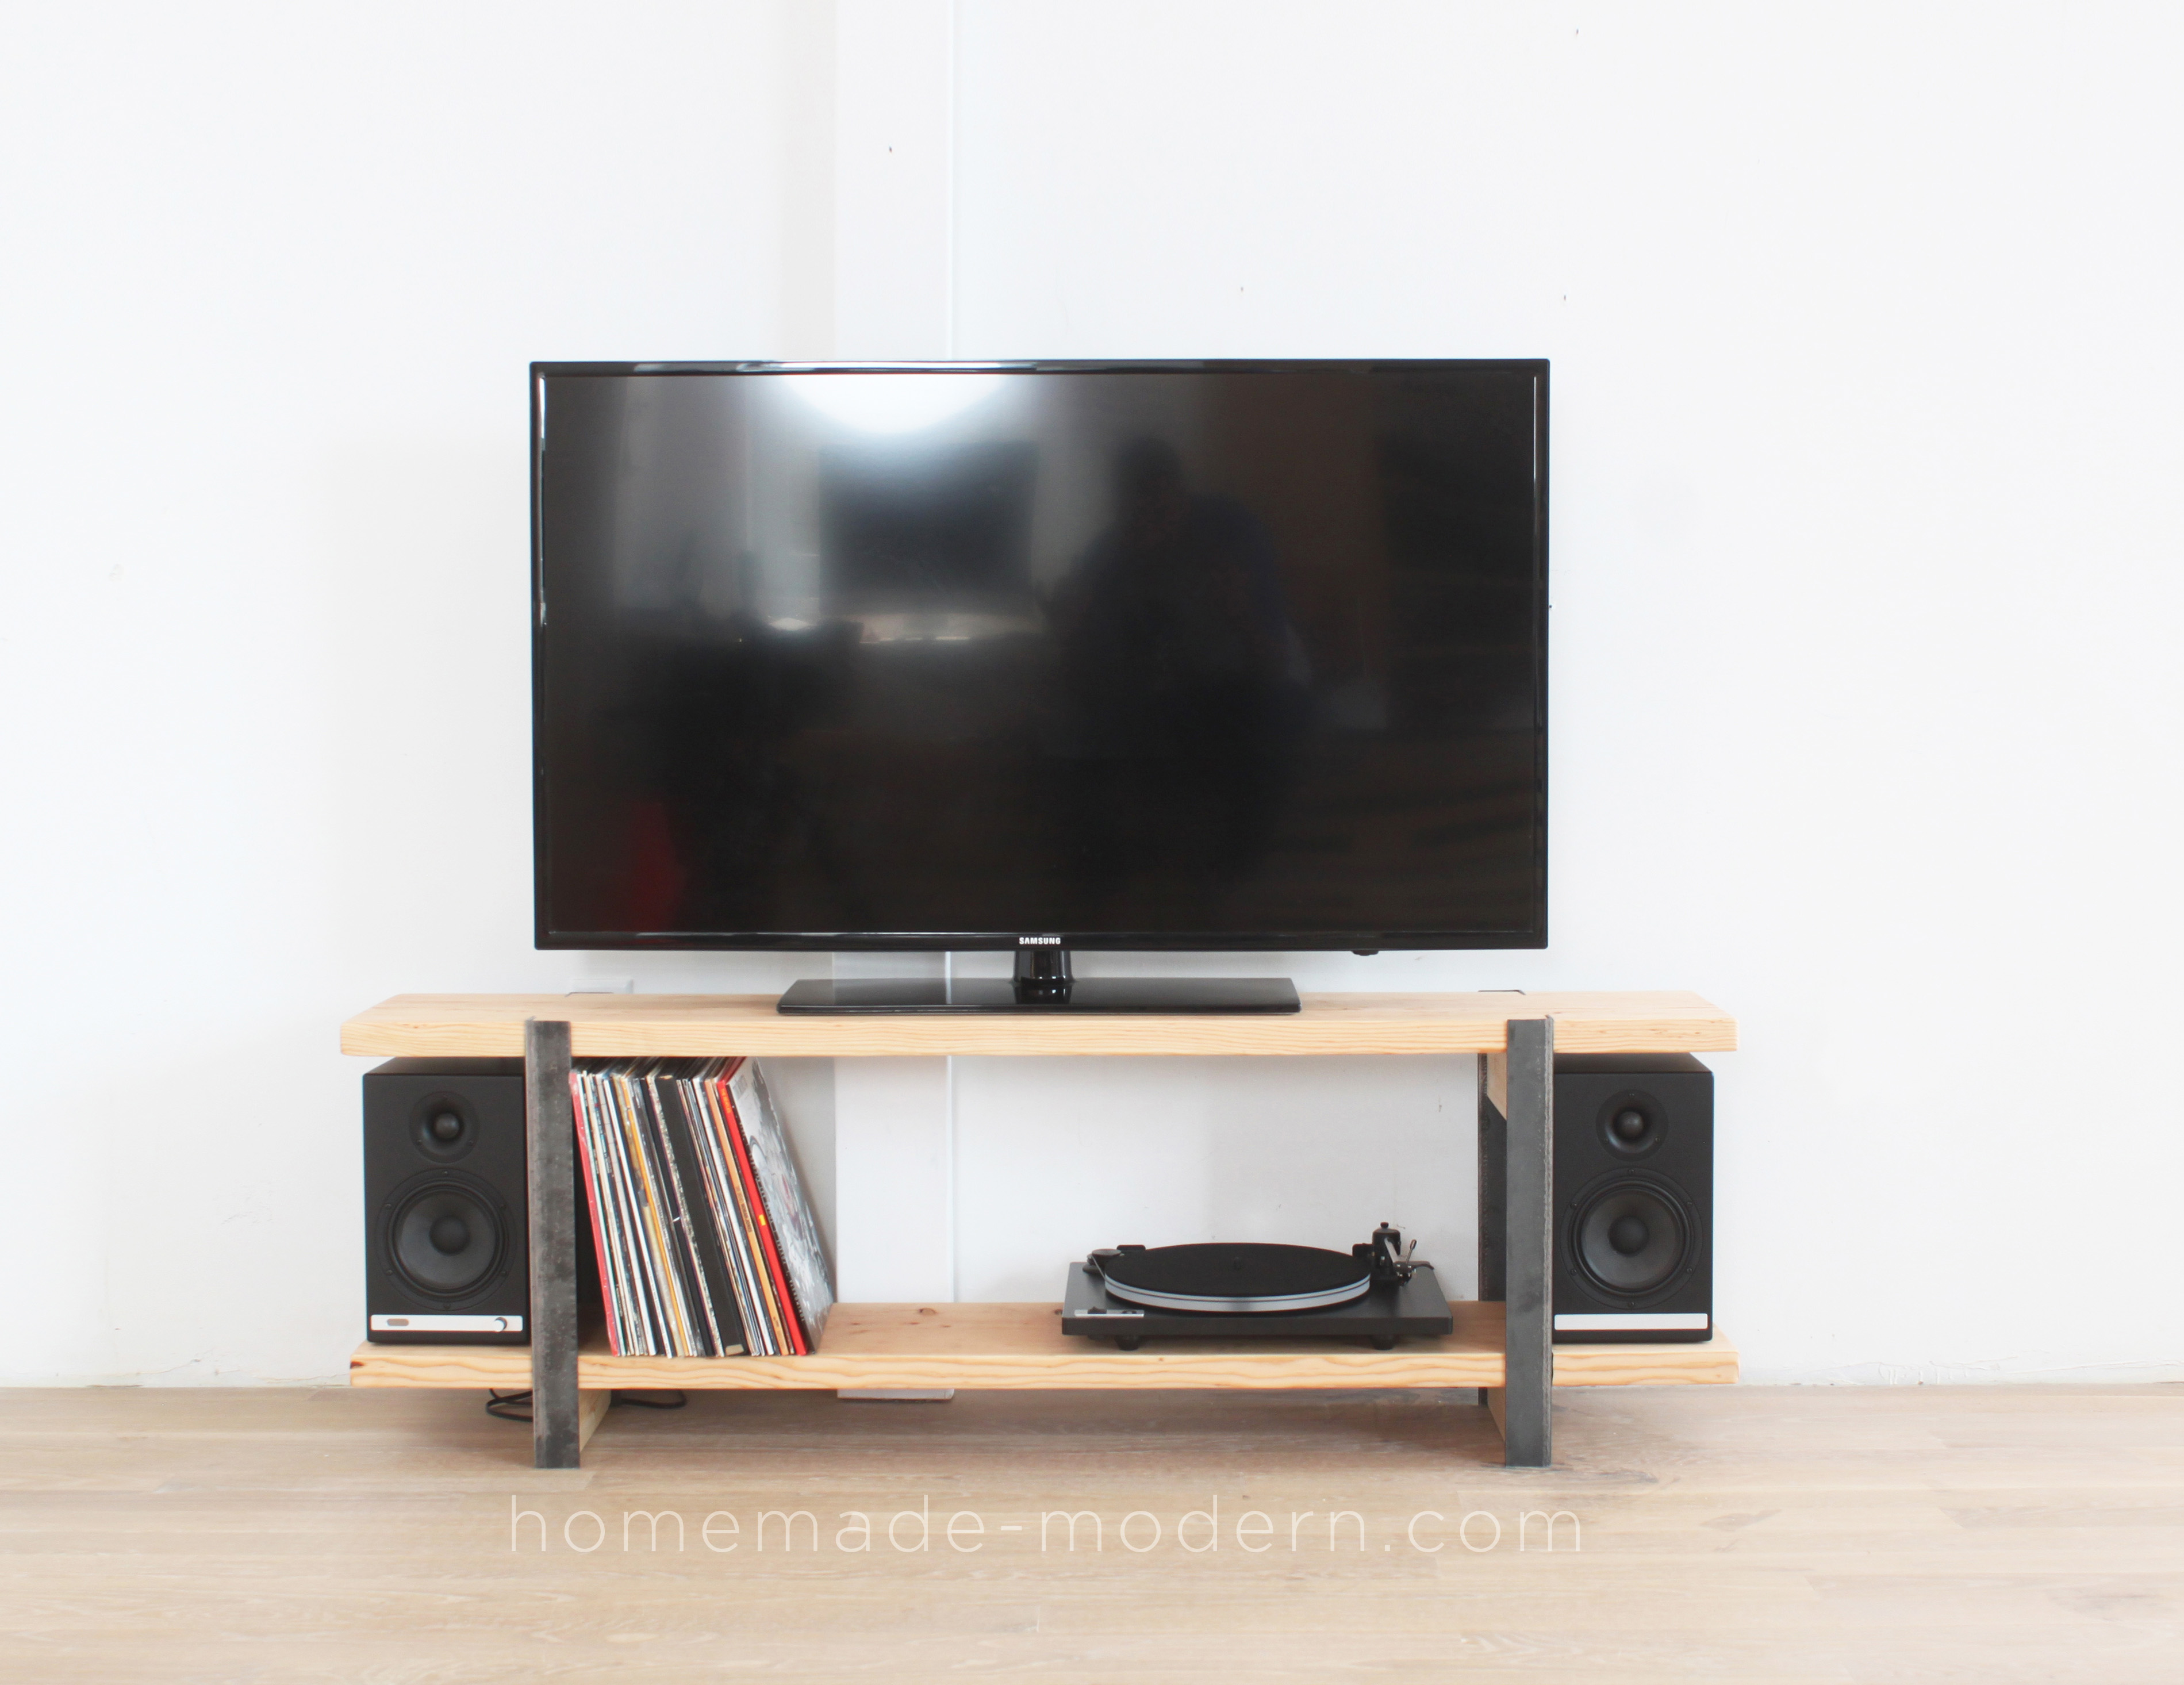 This DIY Media Console is made out of 2x12 and angle irons and the shelves were designed to store vinyl records. For more information go to HomeMade-Modern.com